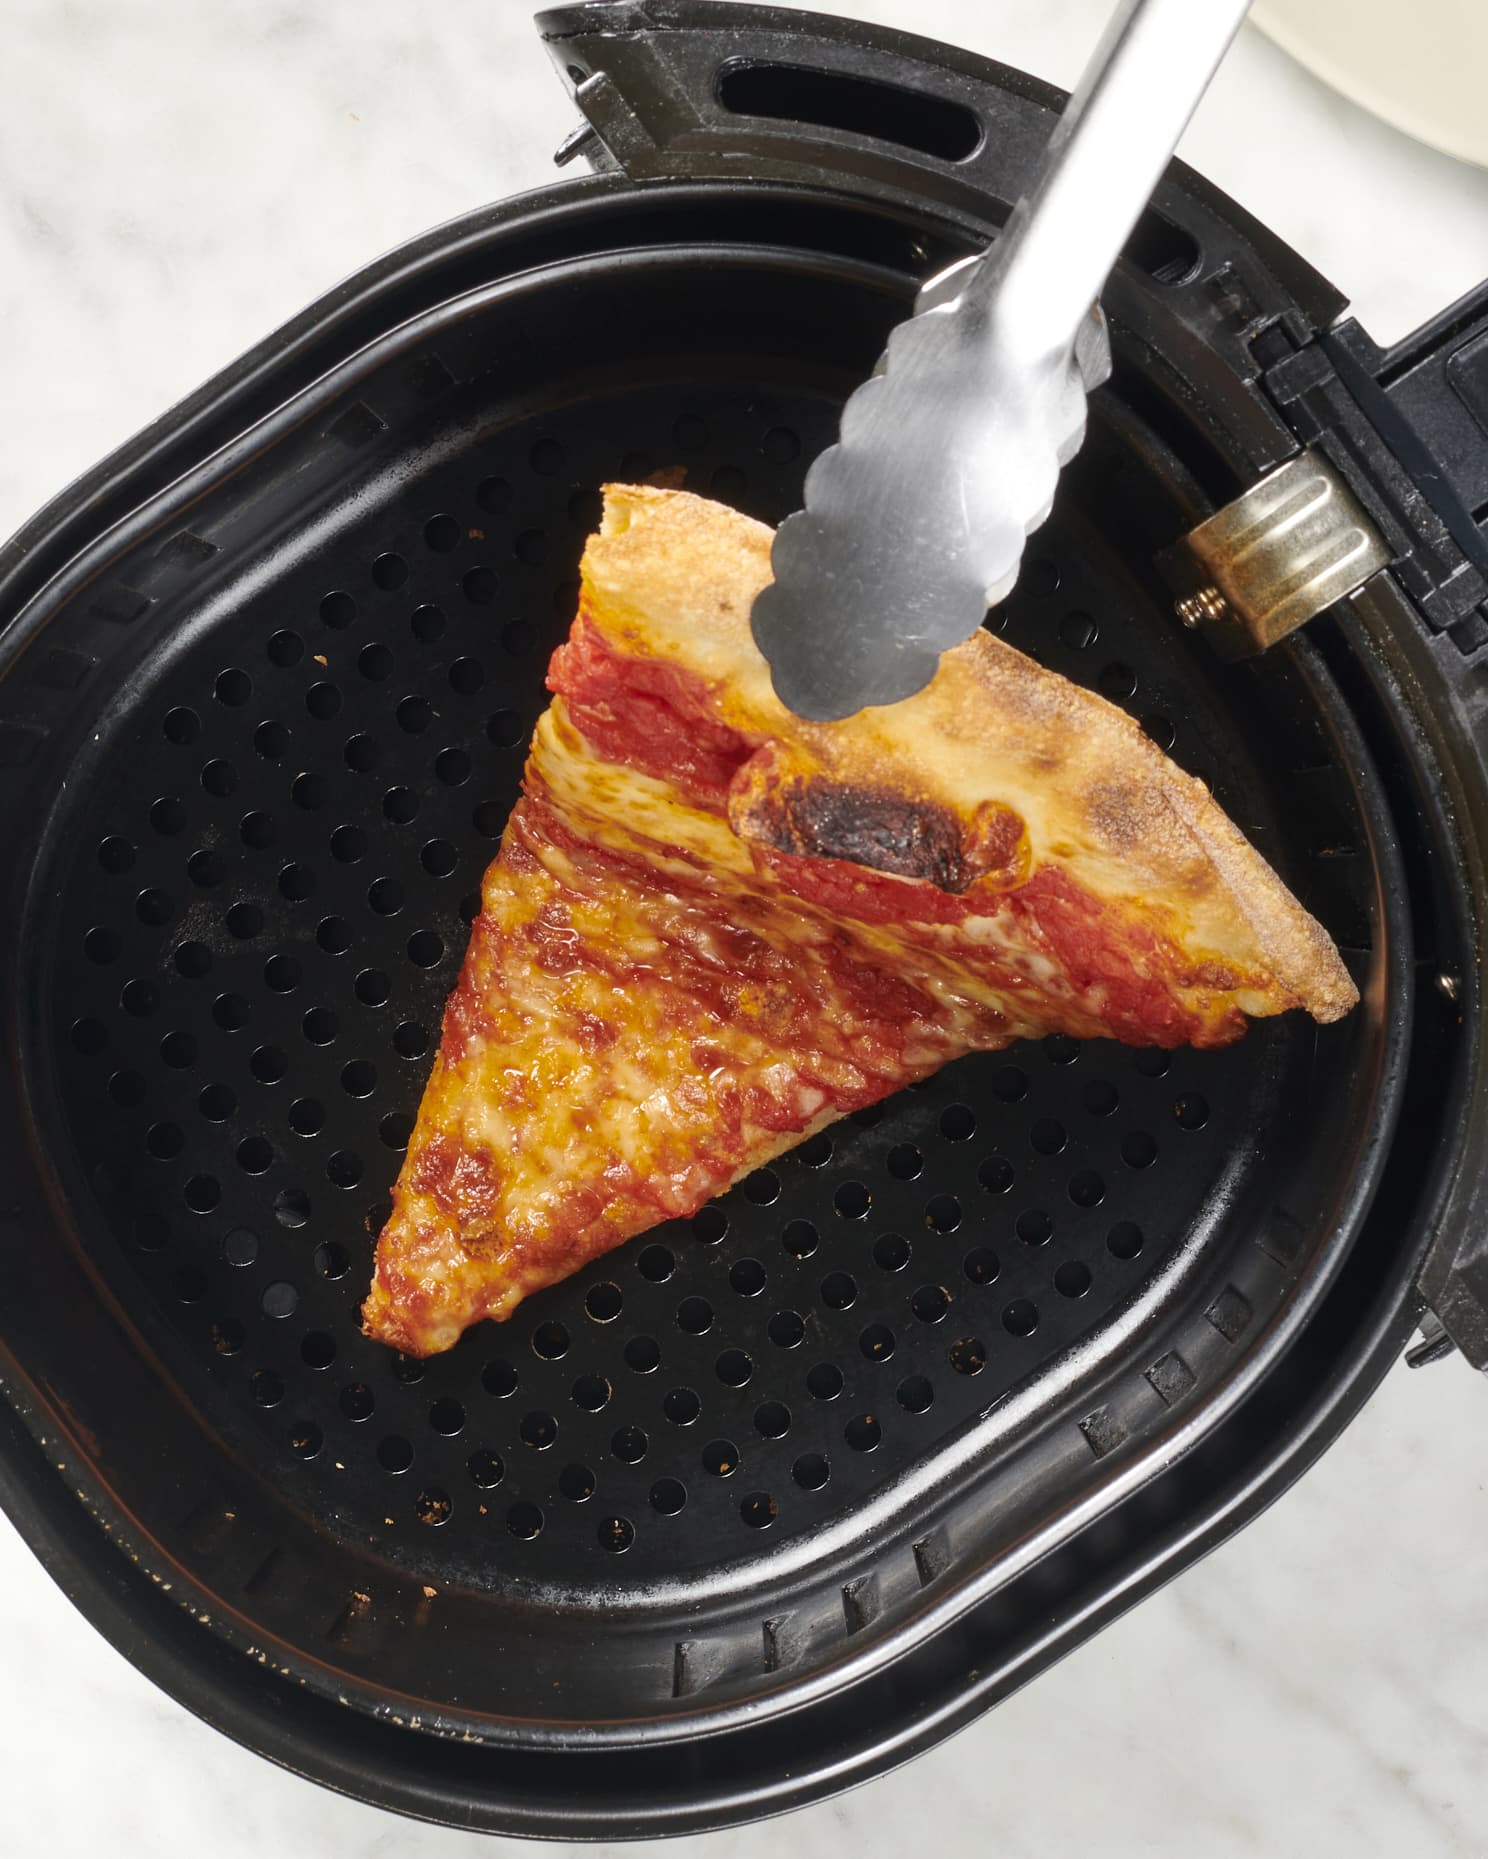 https://cdn.apartmenttherapy.info/image/upload/v1694807899/k/Photo/Series/2023-09-how-to-reheat-pizza-in-an-airfryer/cropped/how-to-reheat-pizza-in-an-air-fryer-082.-01g.jpg